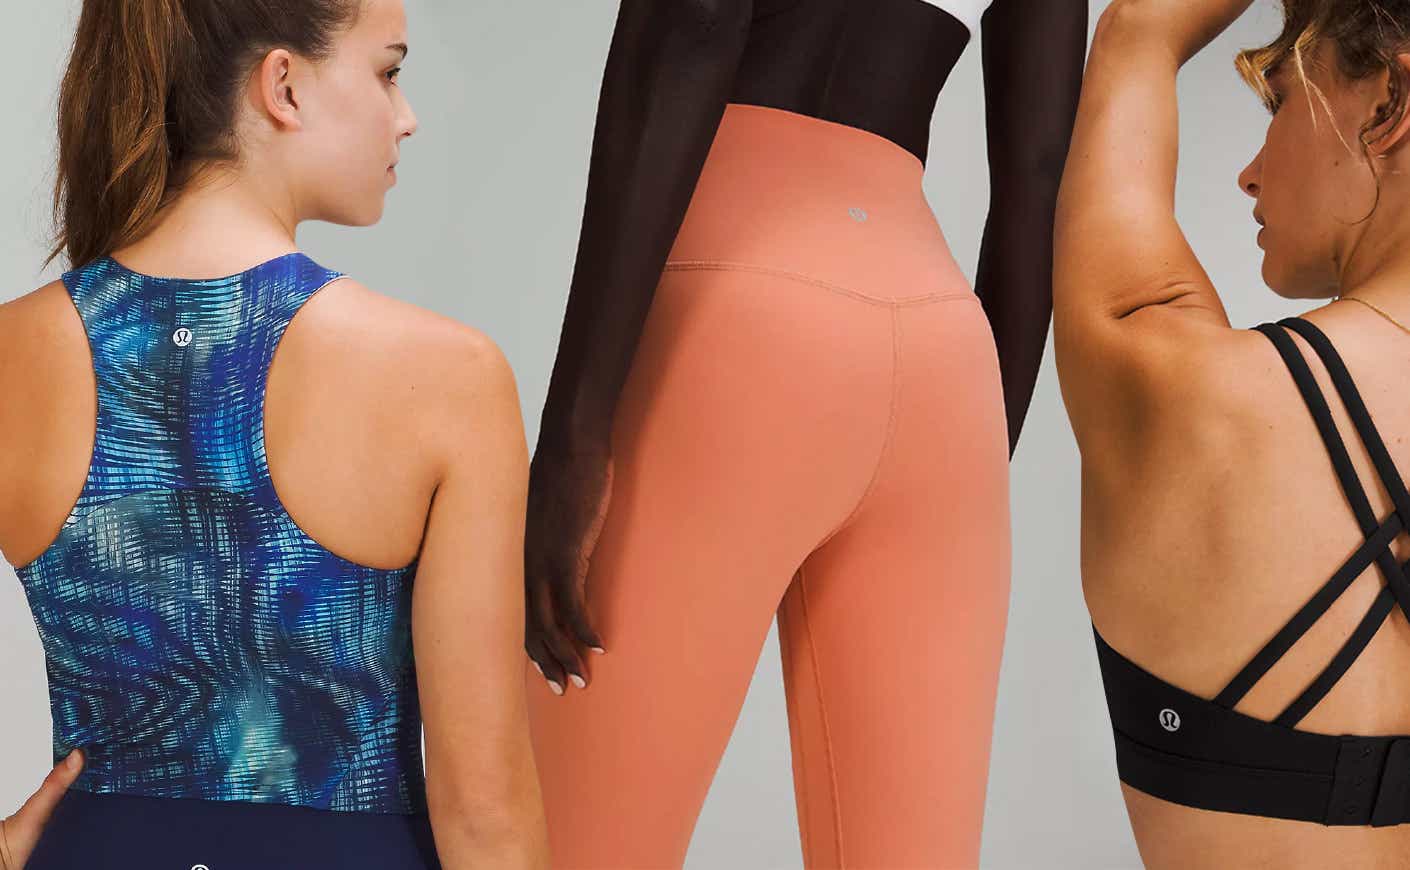 Lululemon's We Made Too Much section: Best deals on tanks and